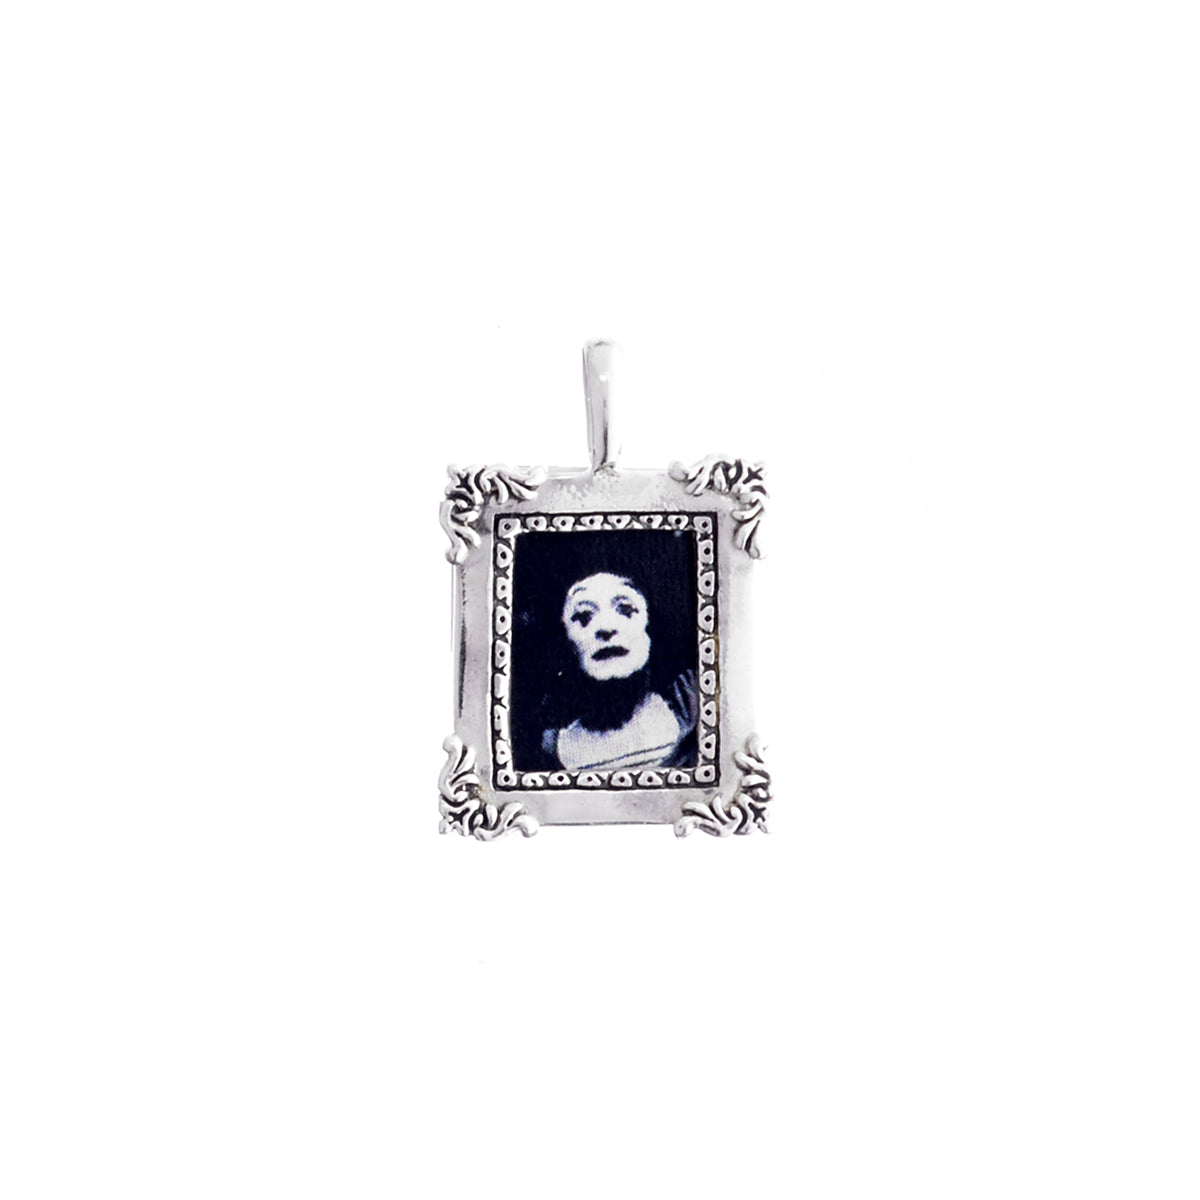 Selfie Rococo Picture Frame Sterling Silver Charm